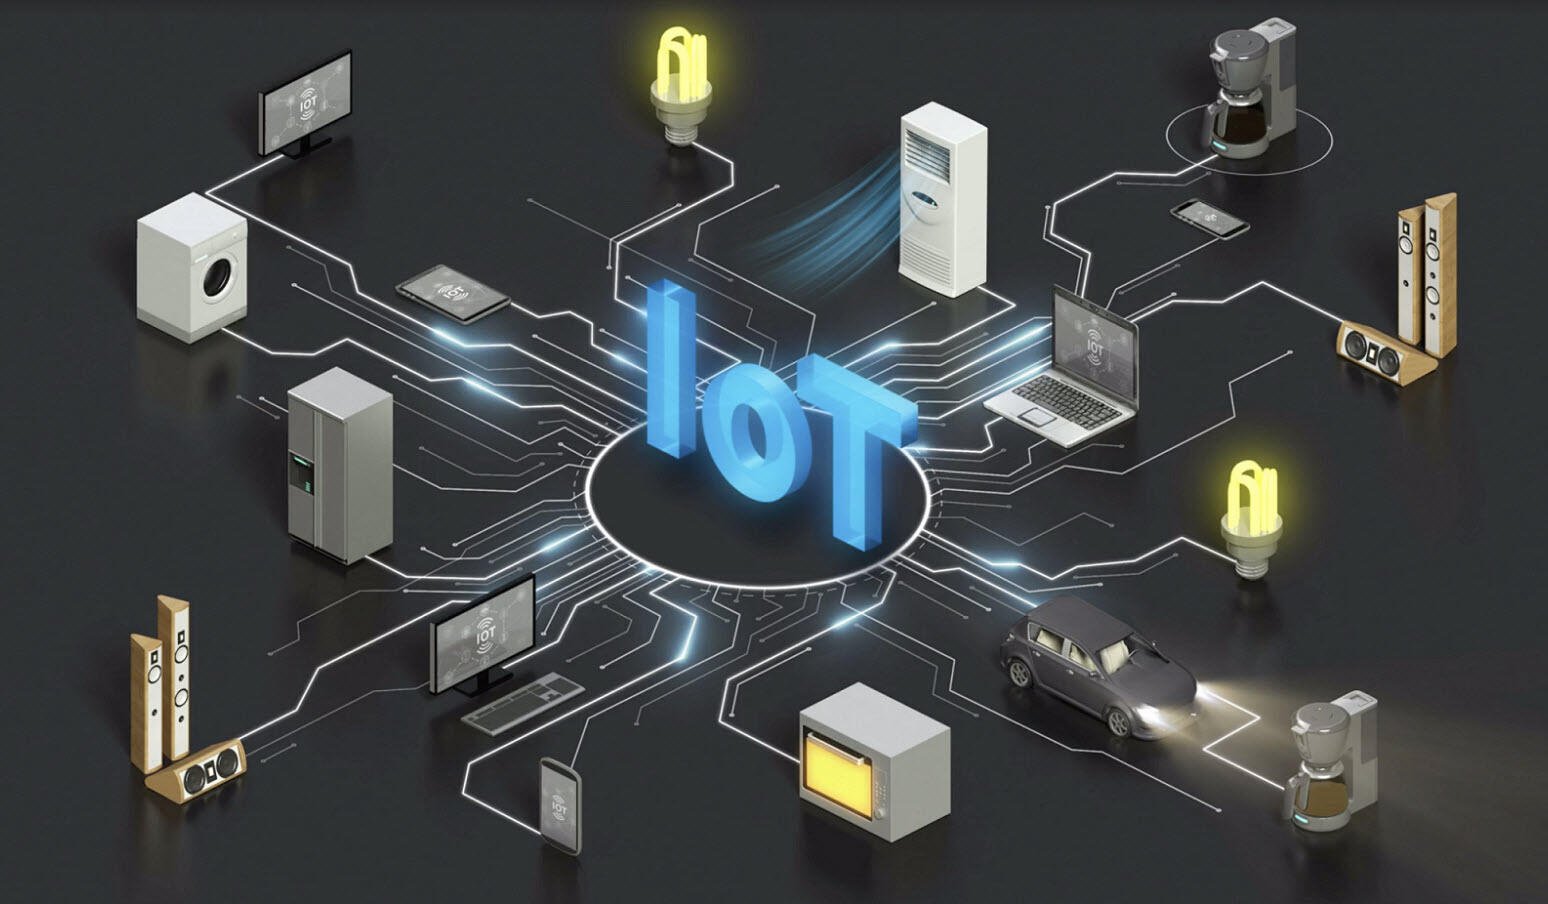 What exactly is the internet of things we shorten as IoT?